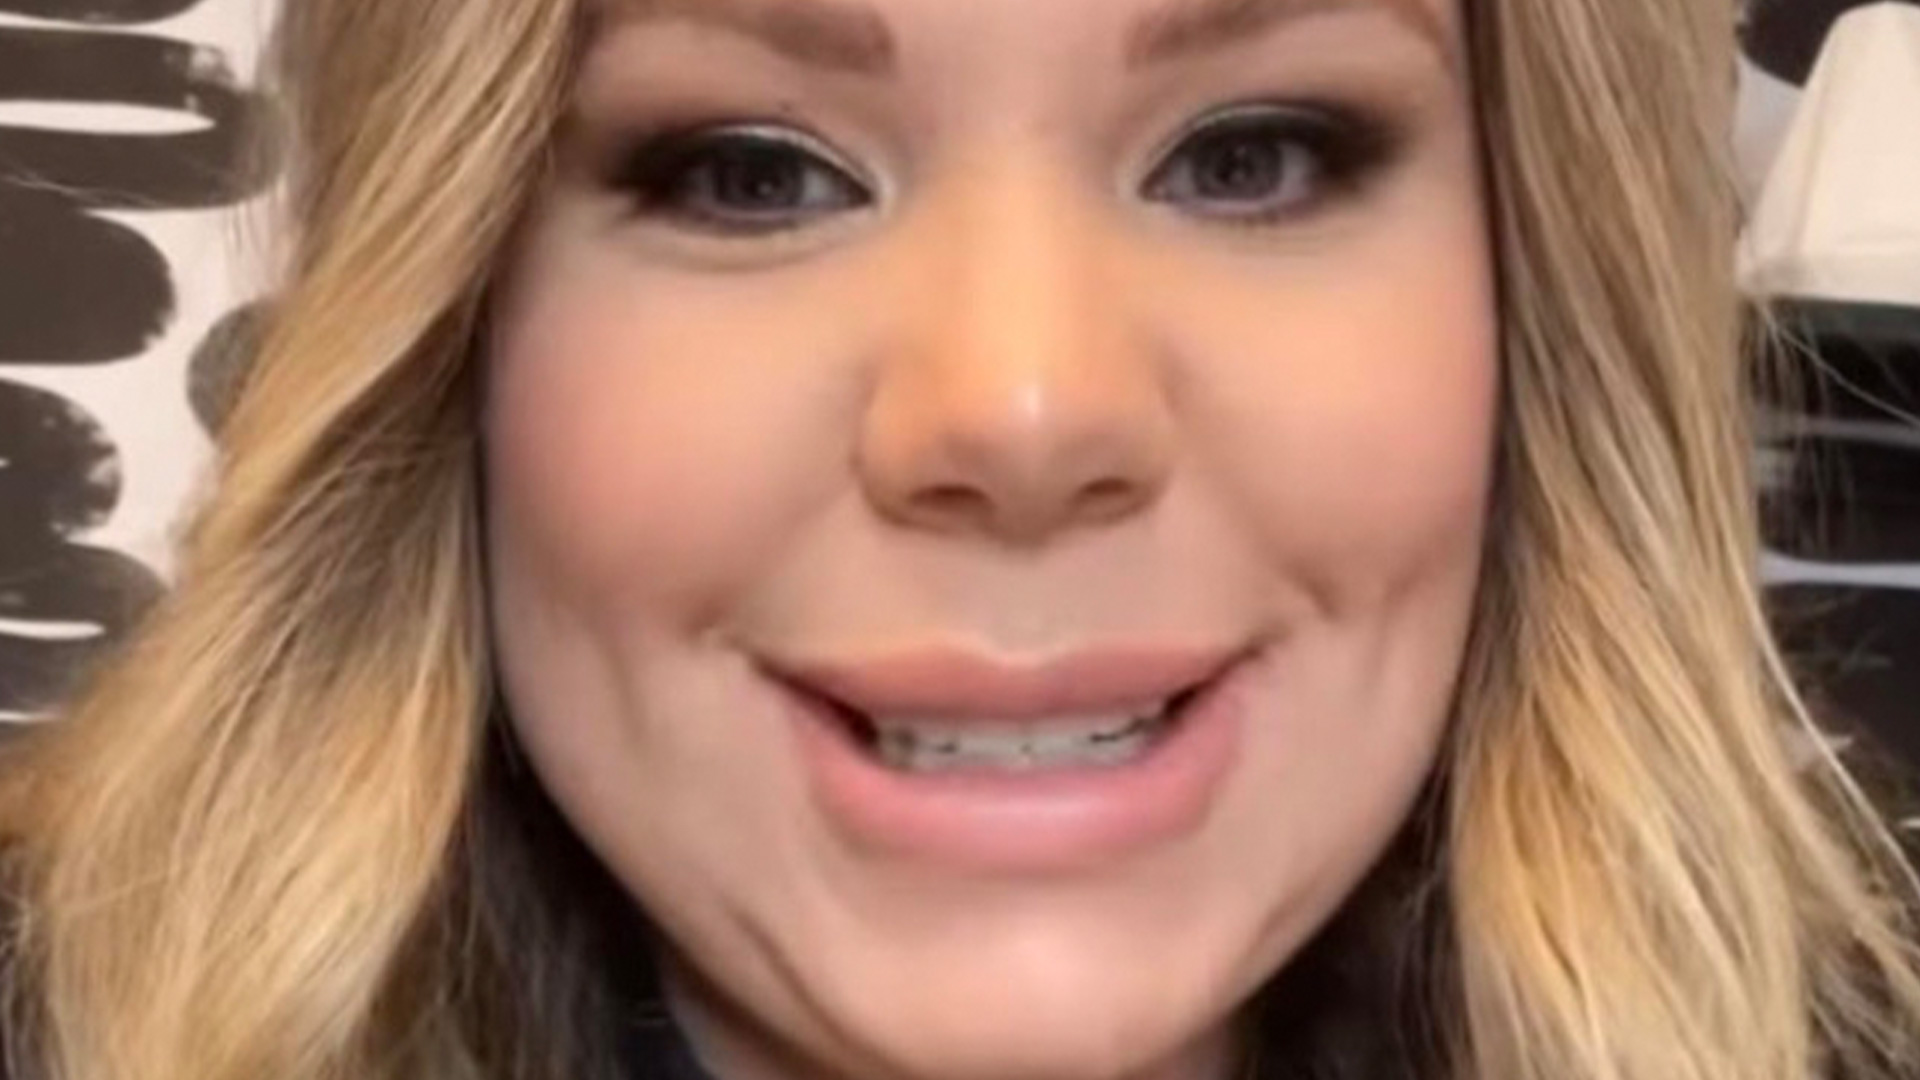 Kailyn Lowry, a teenager mom, says she was ‘locked up in a cell for hours and even hours’ while pregnant.